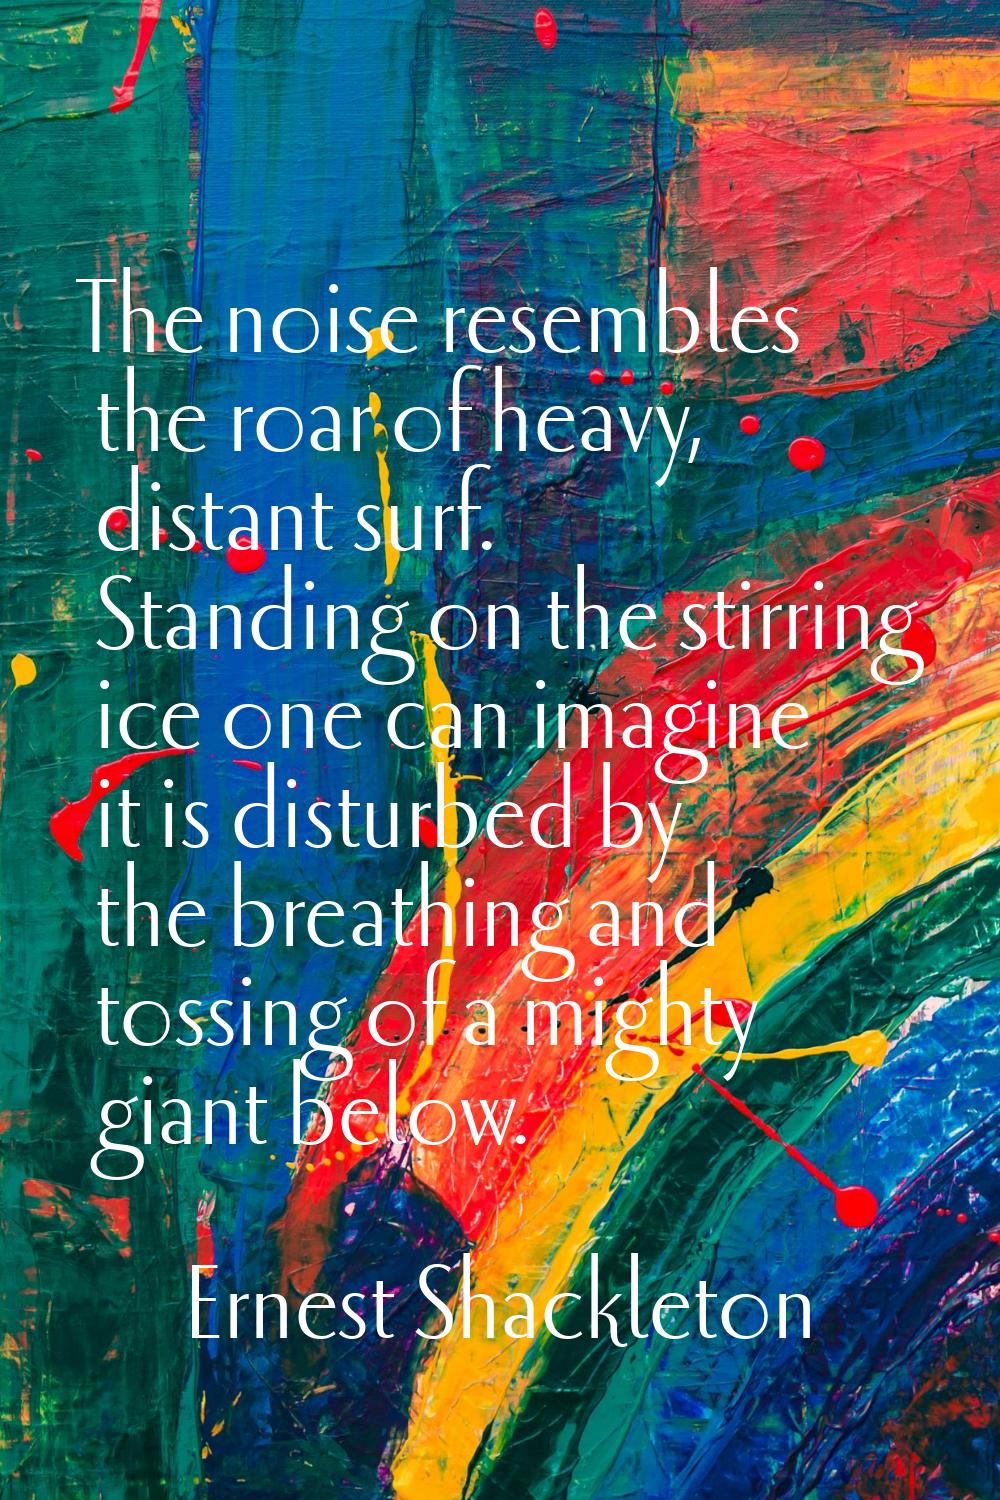 The noise resembles the roar of heavy, distant surf. Standing on the stirring ice one can imagine i